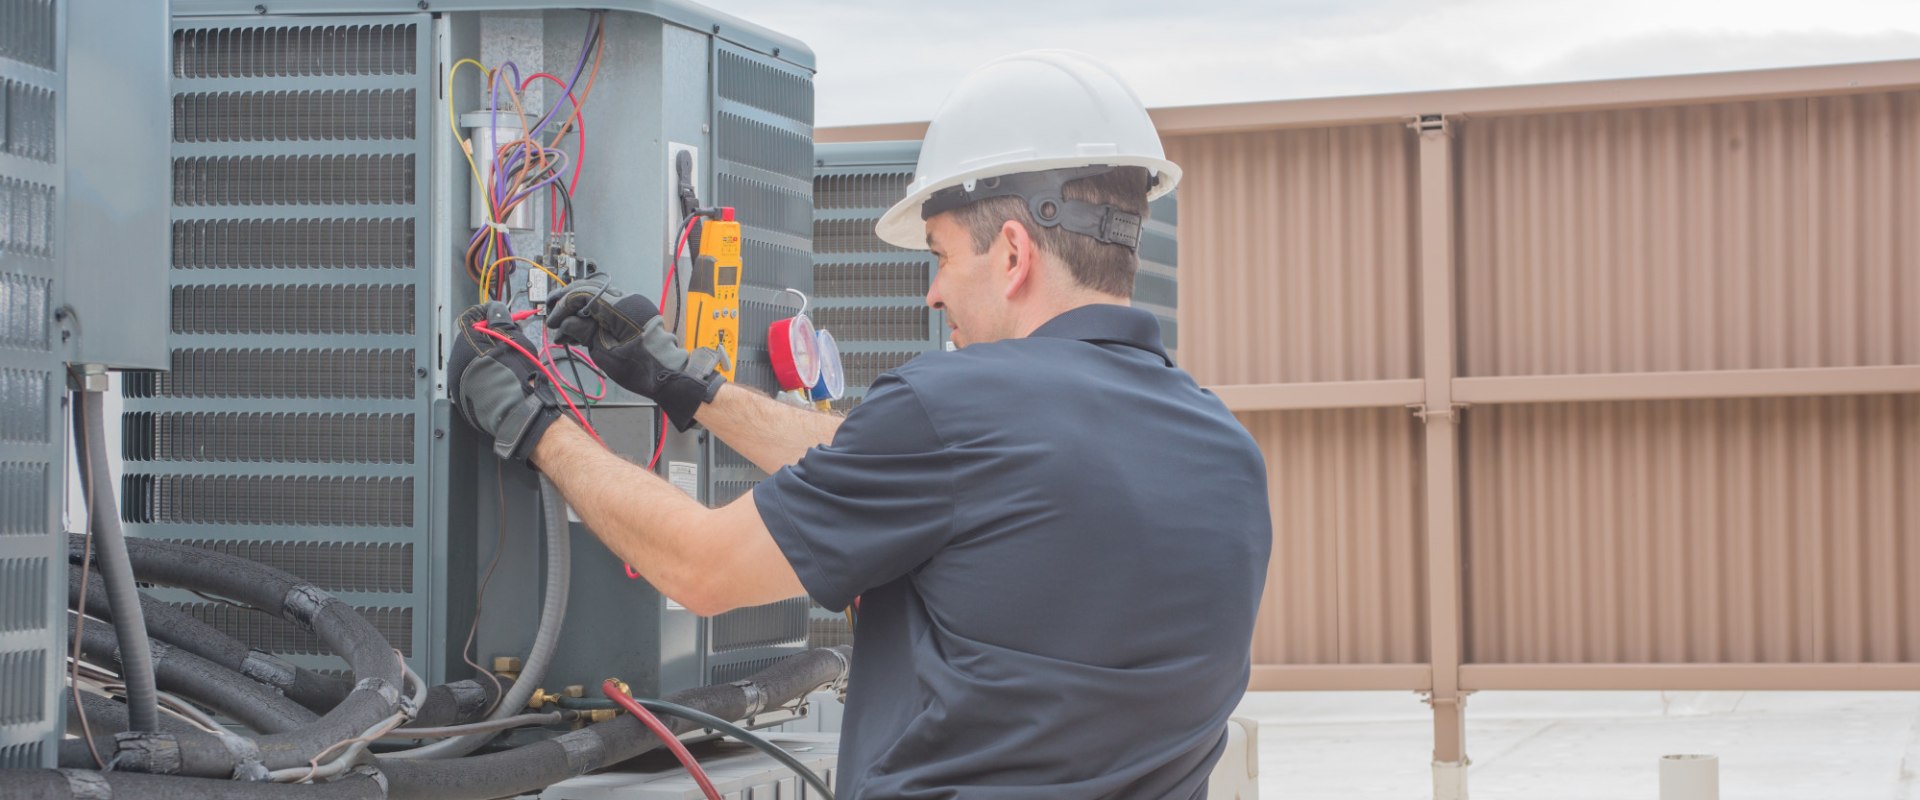 How often should you get an hvac tune-up?